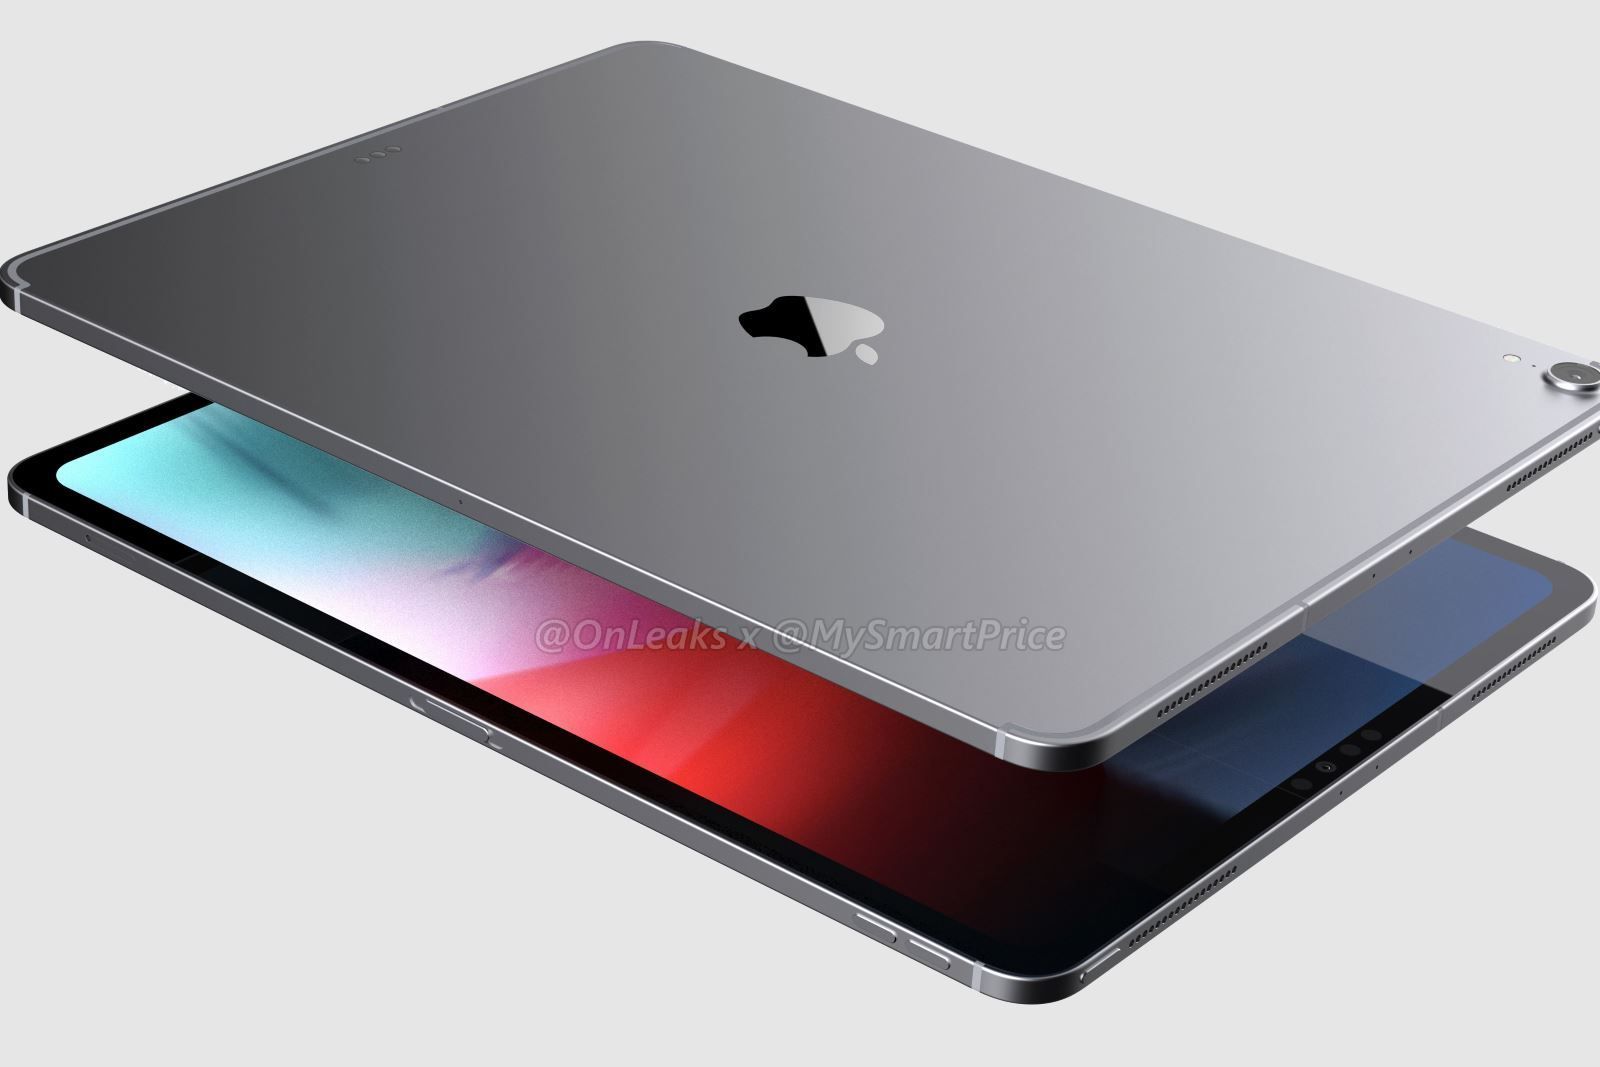 This is what the new iPad Pro with Face ID will look like image 1